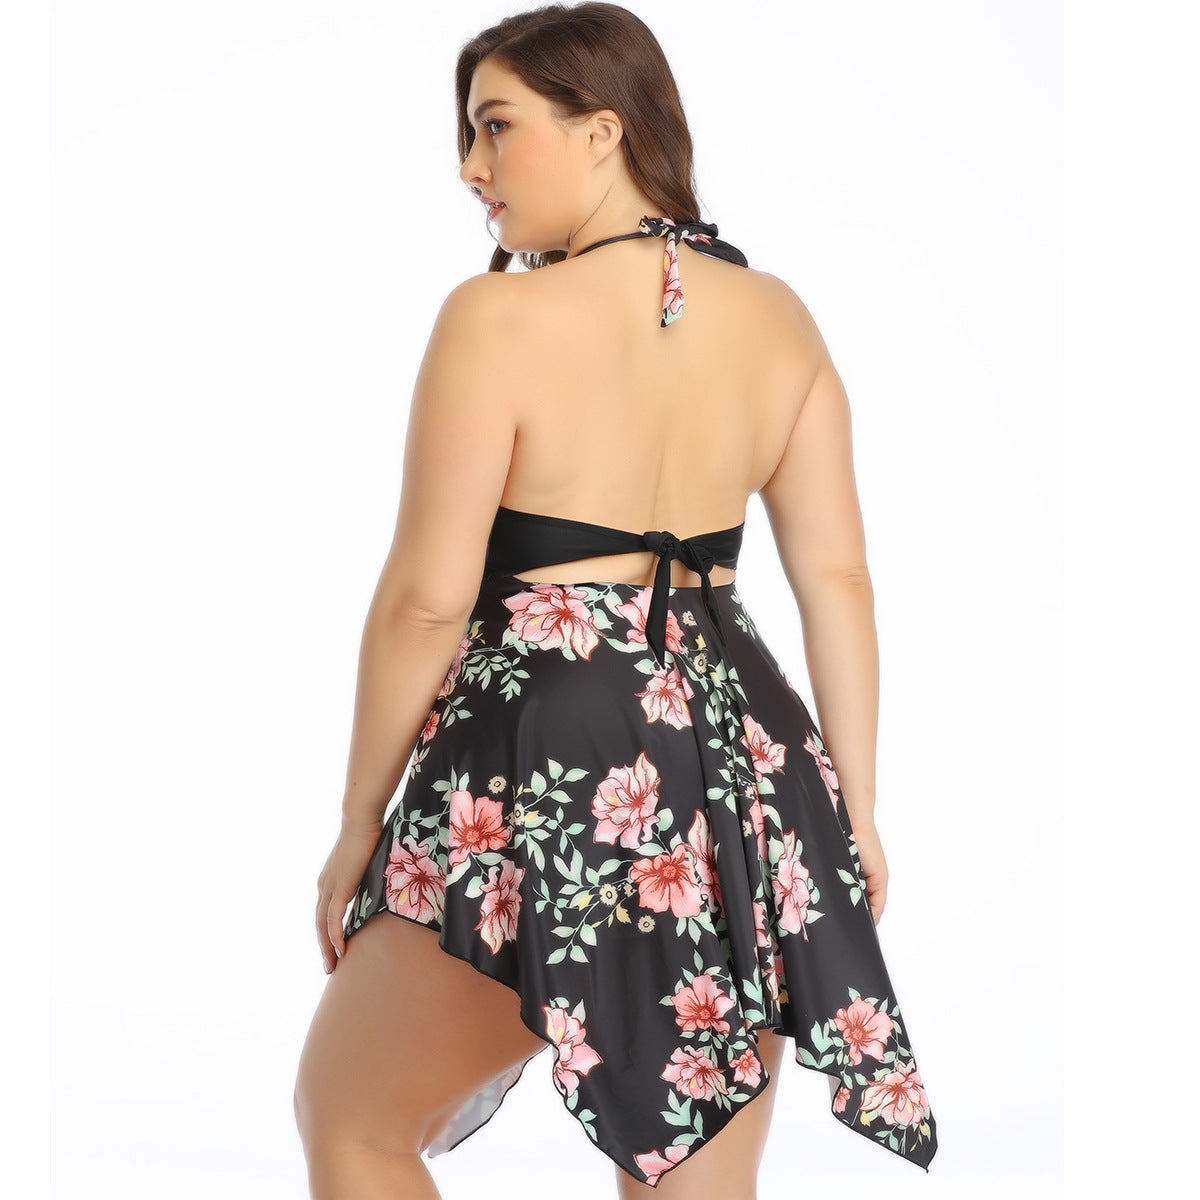 Floral Print Halter With Shorts Black Tankini Swimsuit